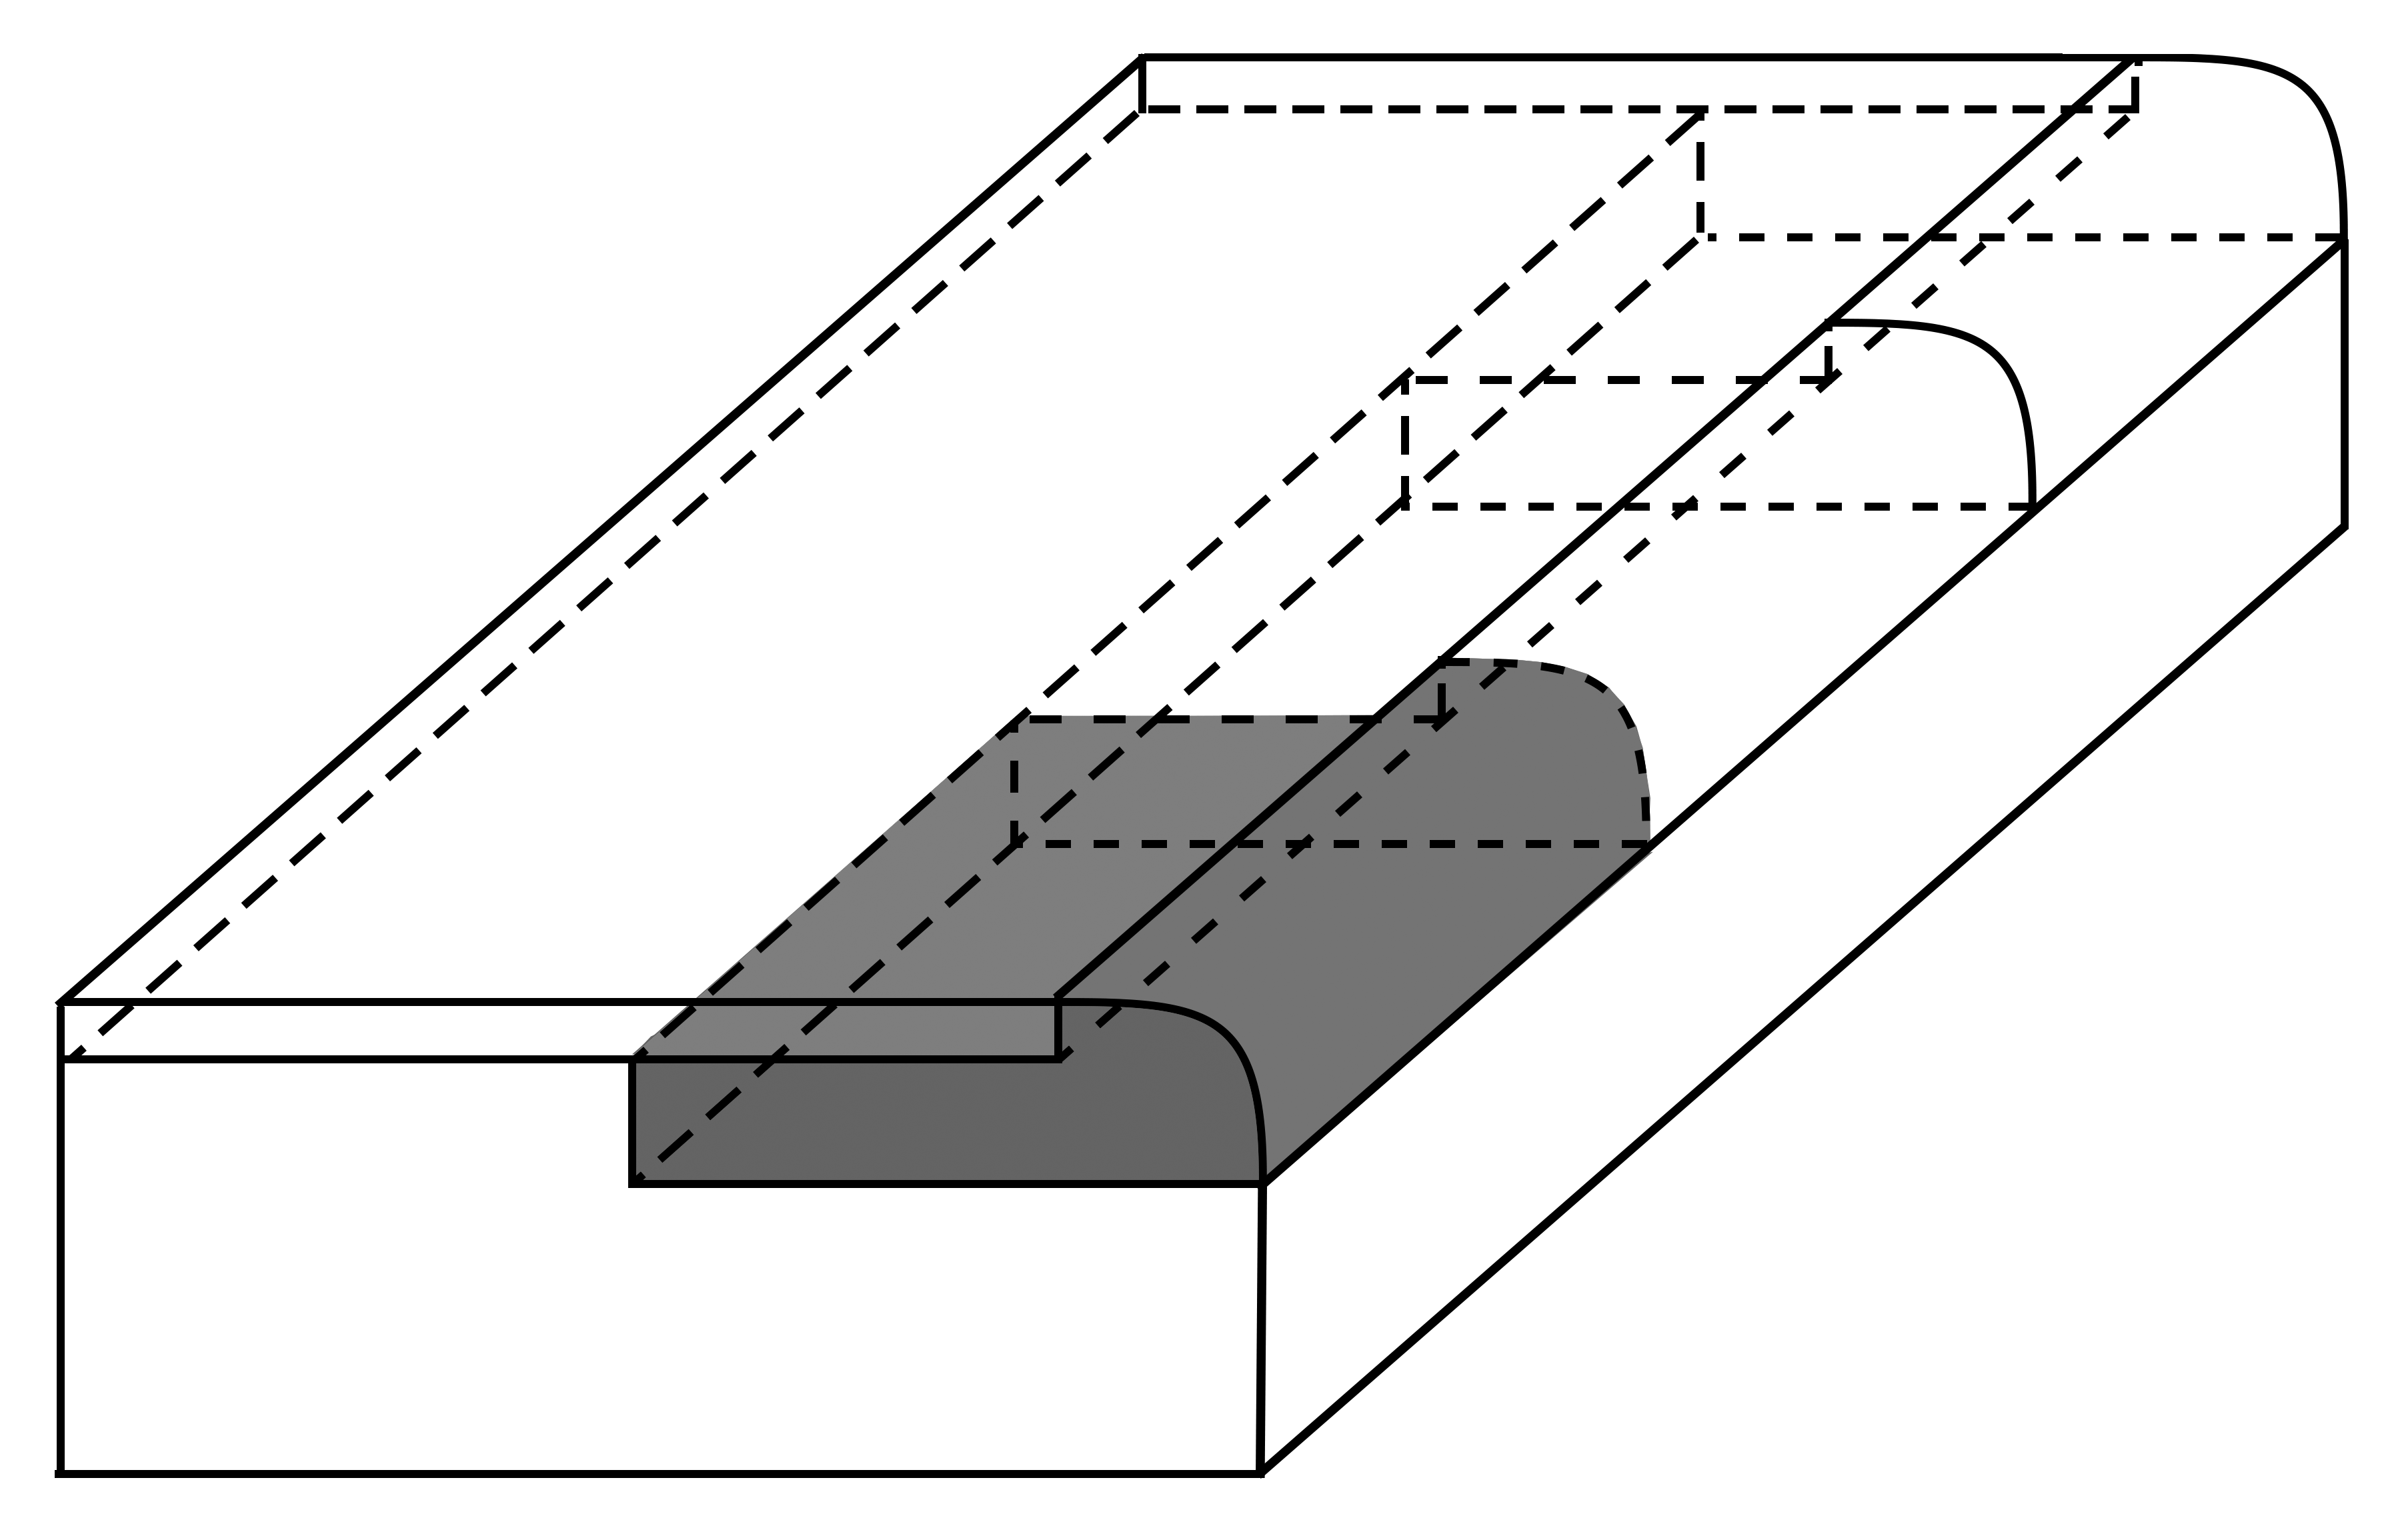 black, white, and gray diagram with dotted lines representing the smaller strips of wood that make up the tabletop